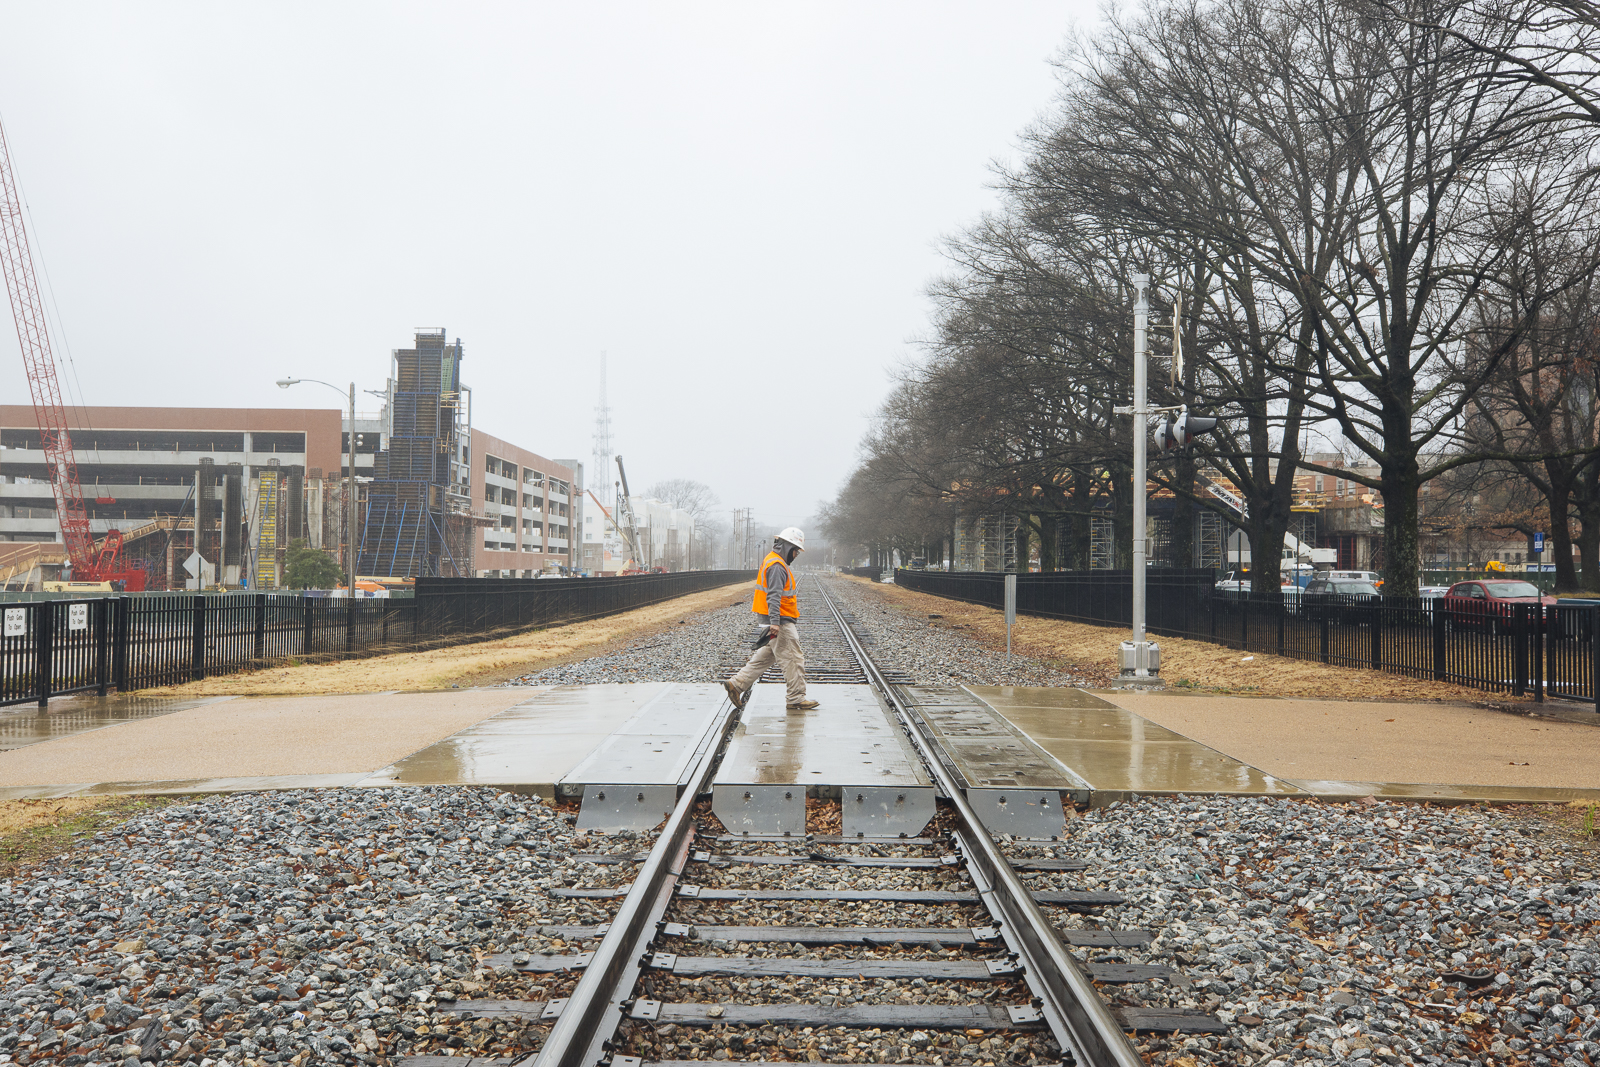 A construction worker crosses the train tracks at Southern Avenue. In the background, the University of Memphis' pedestrian bridge is under construction. (Ziggy Mack)